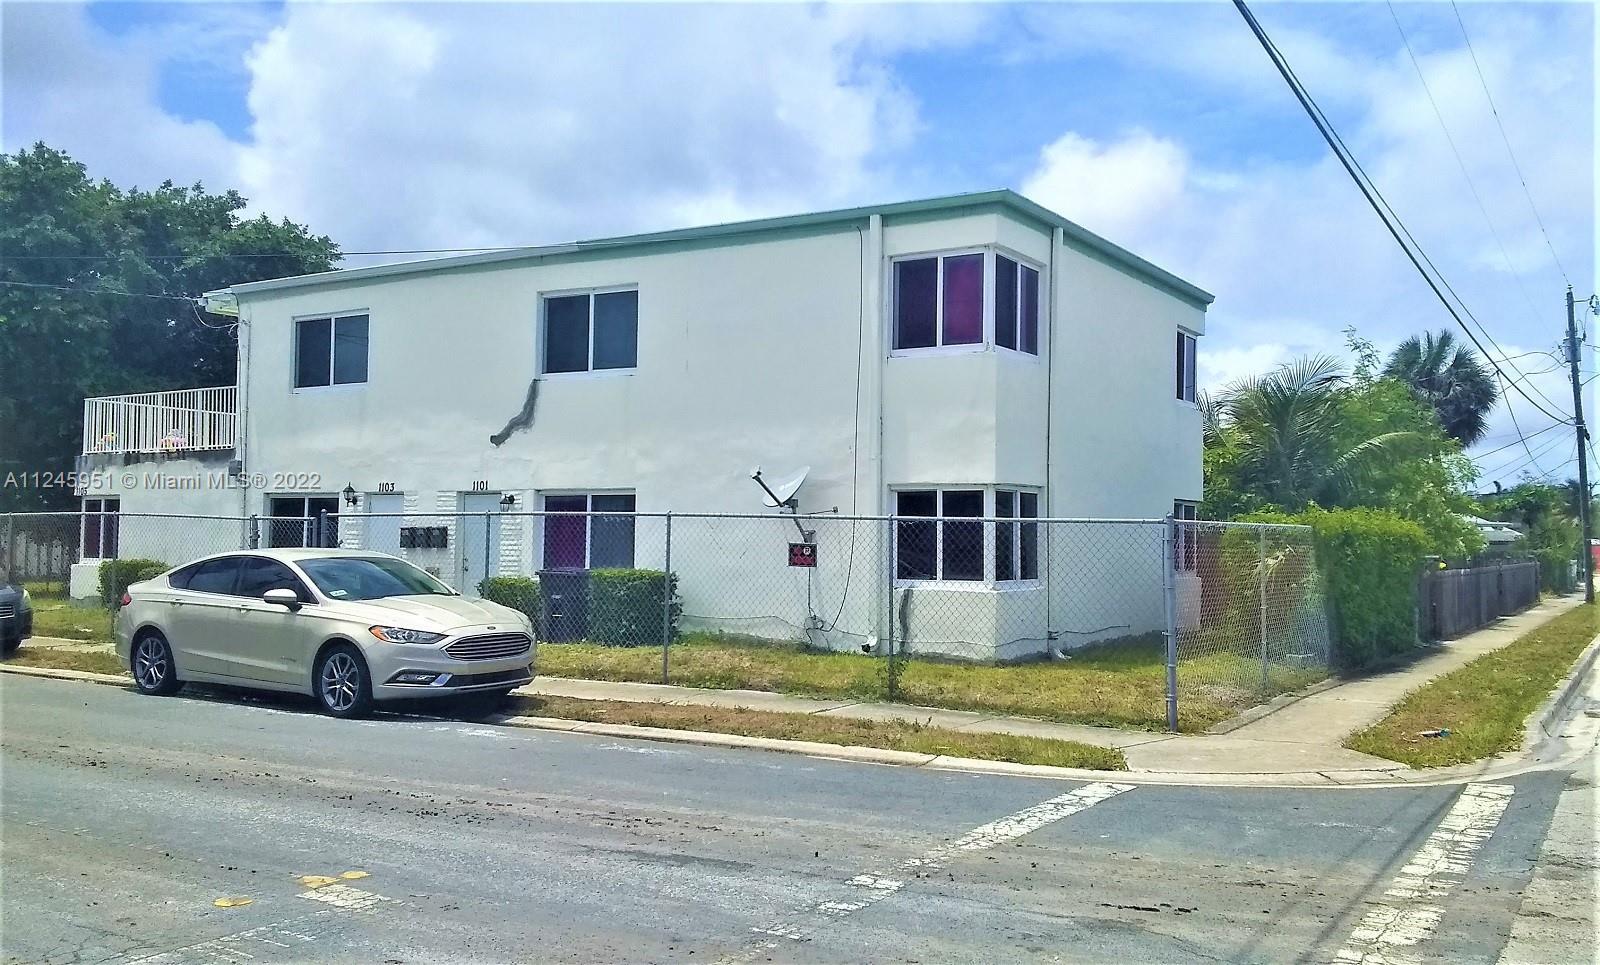 CBS renovated triplex located East of I-95 and close to downtown West Palm Beach. Impact glass throu